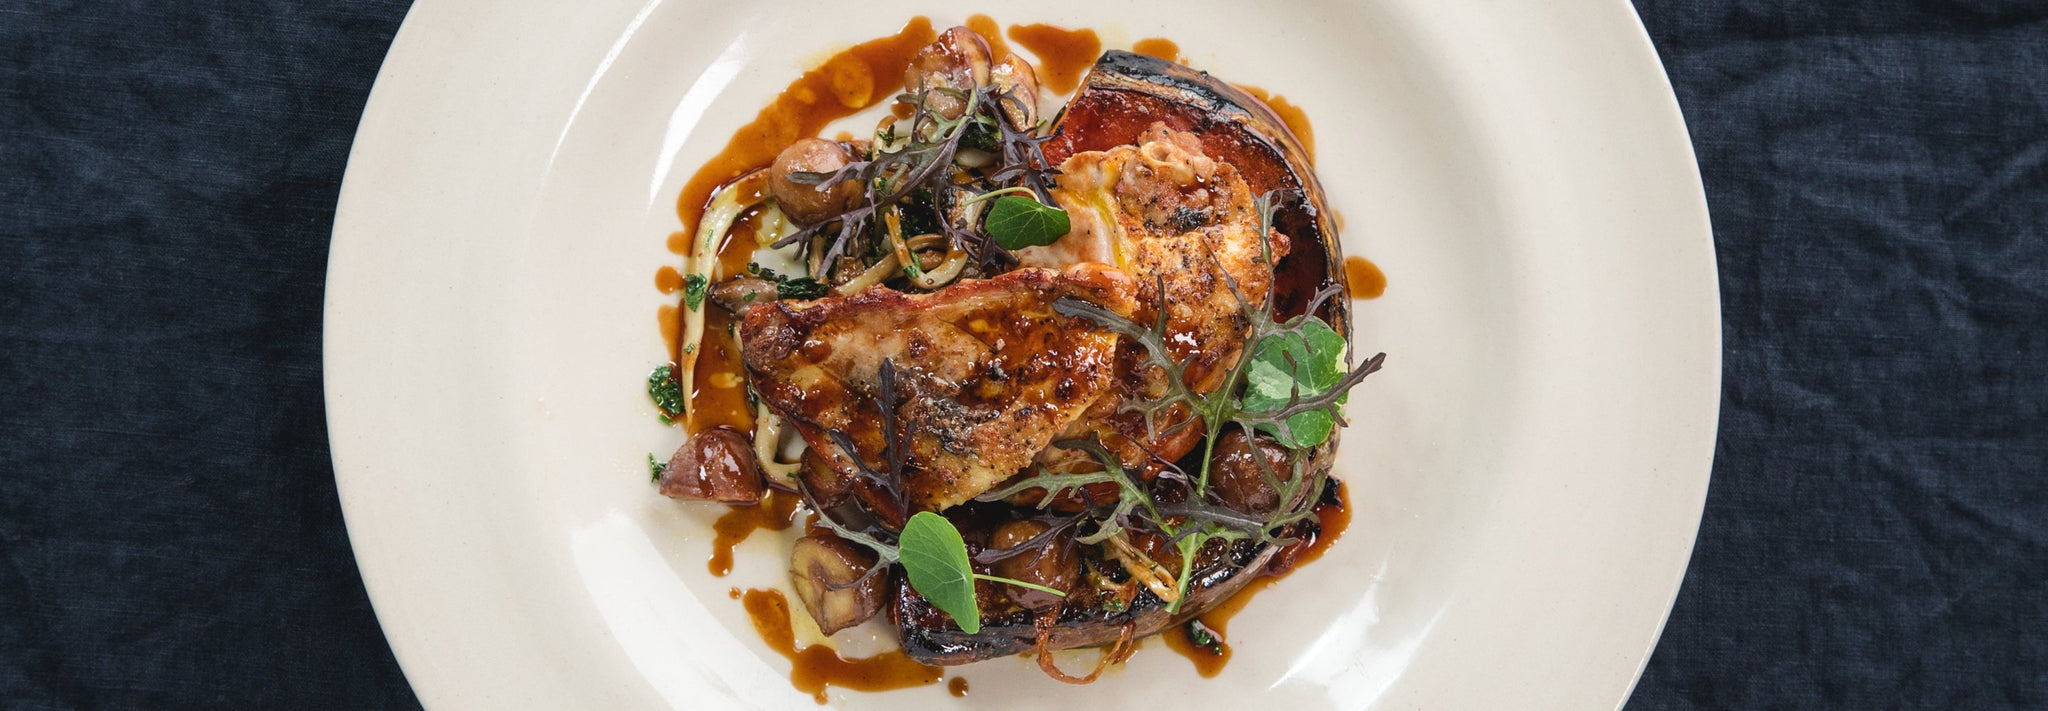 Pheasant Breast with Oyster Mushrooms - Gozney . Roccbox